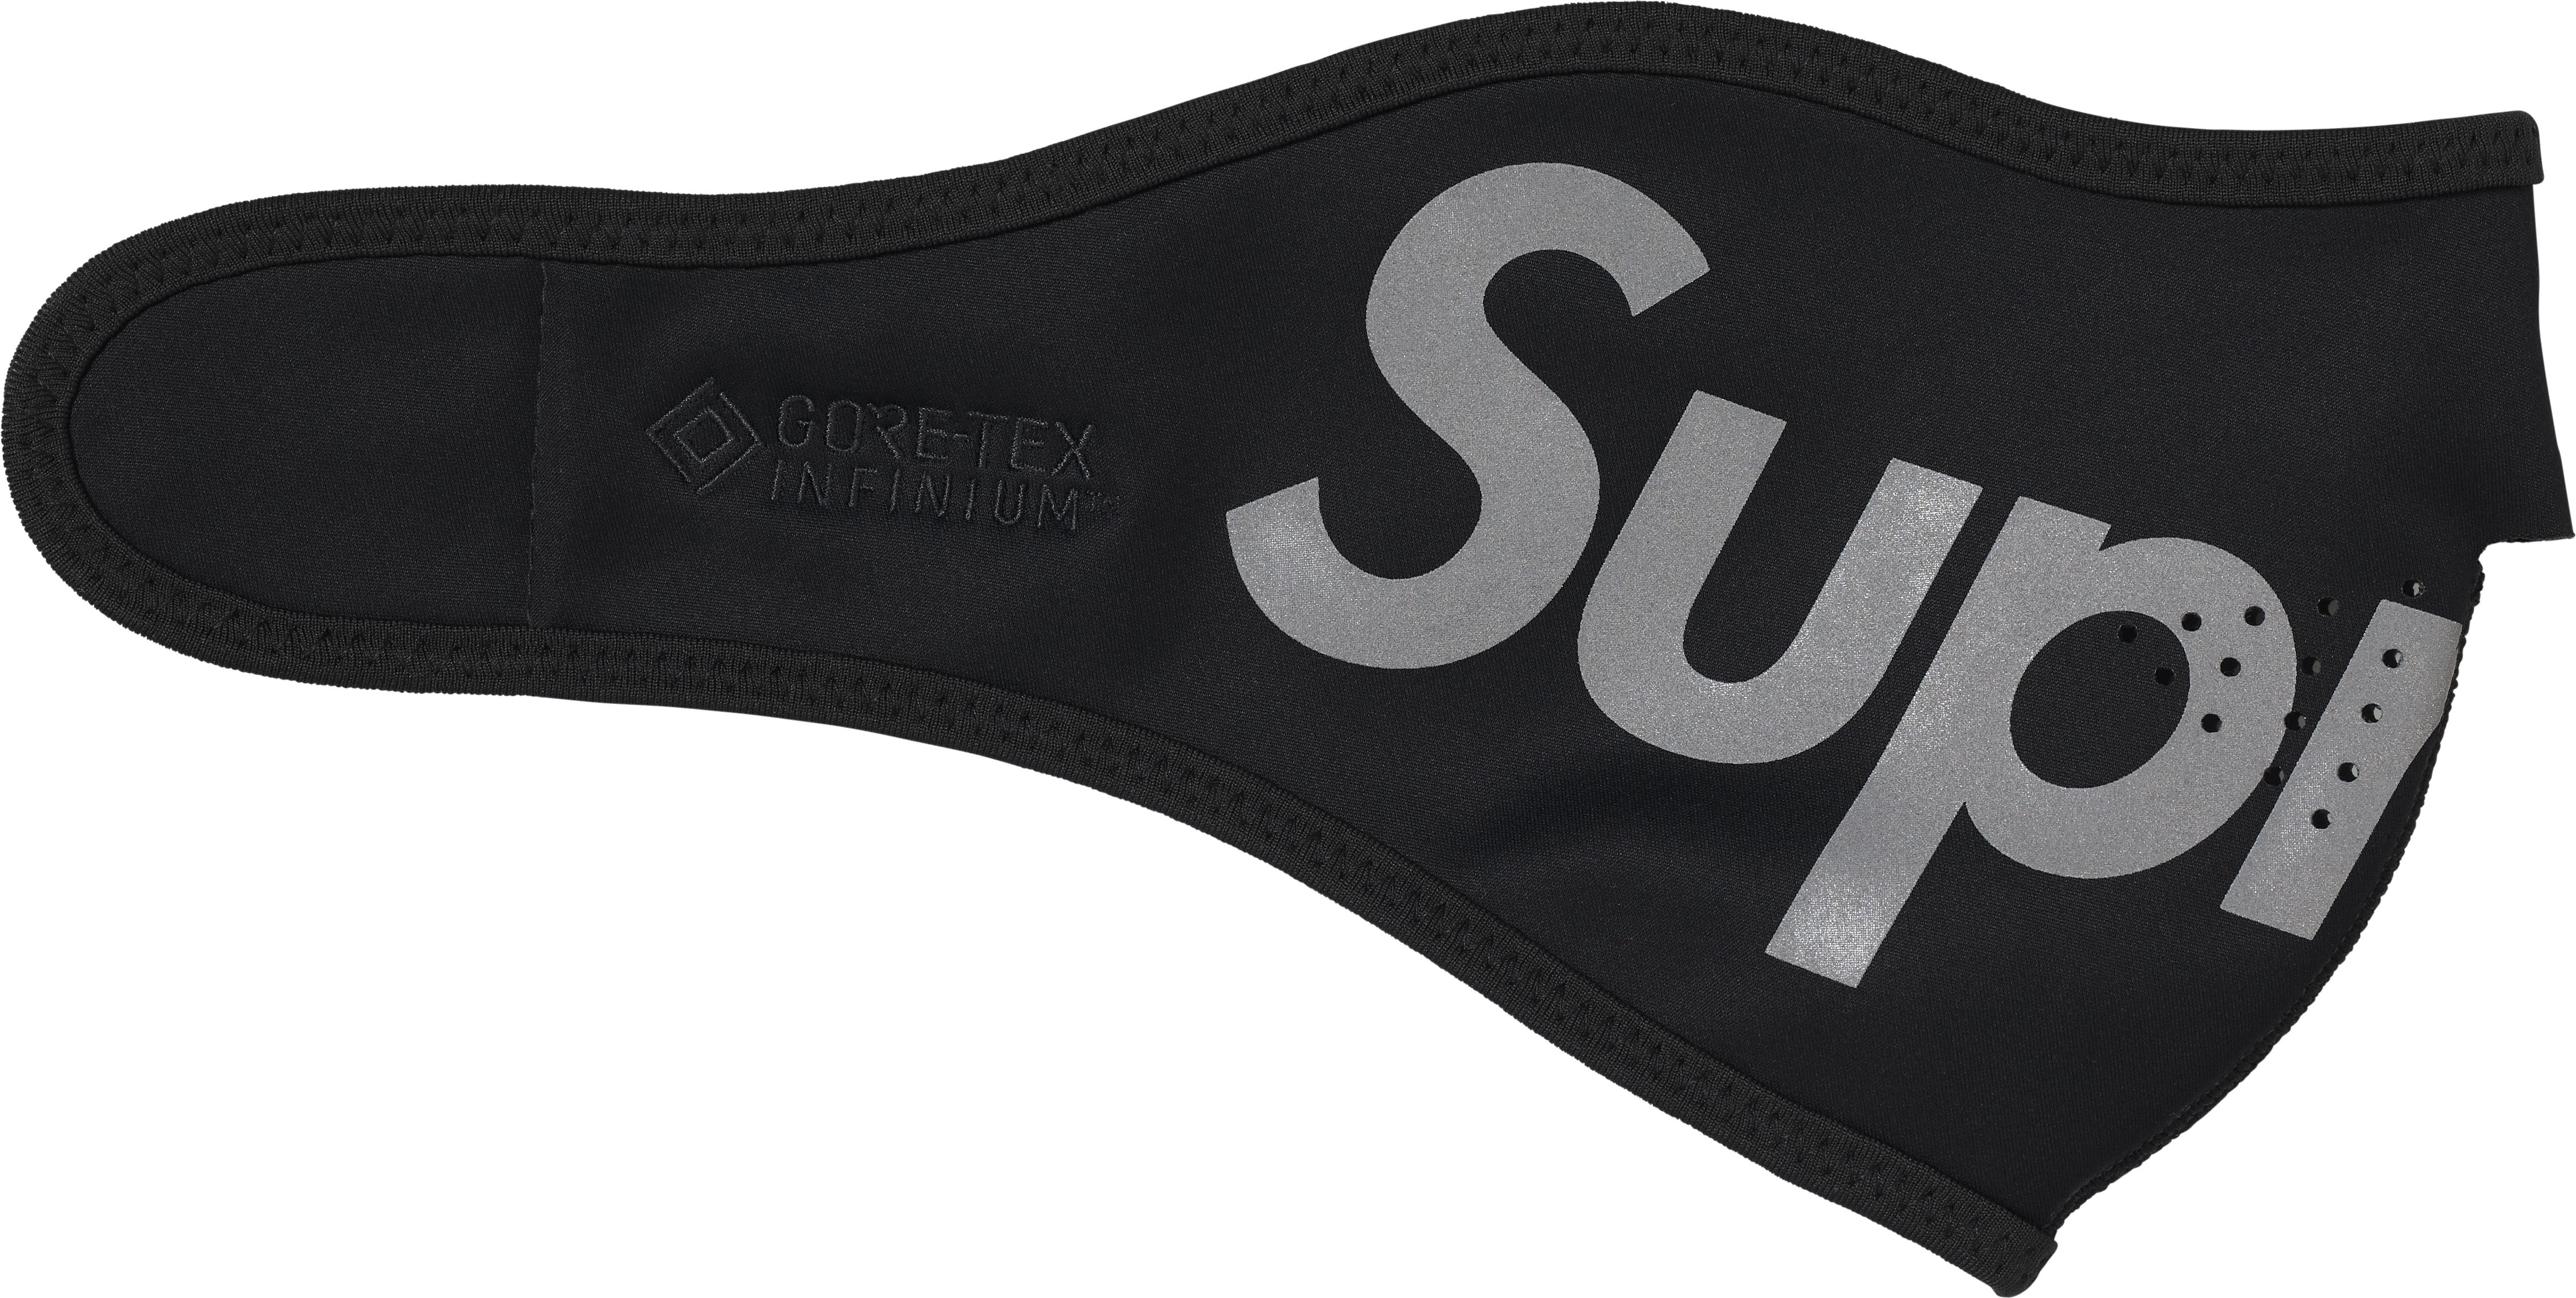 22FW Supreme Windstopper Facemask Black 黒サイズOnesize